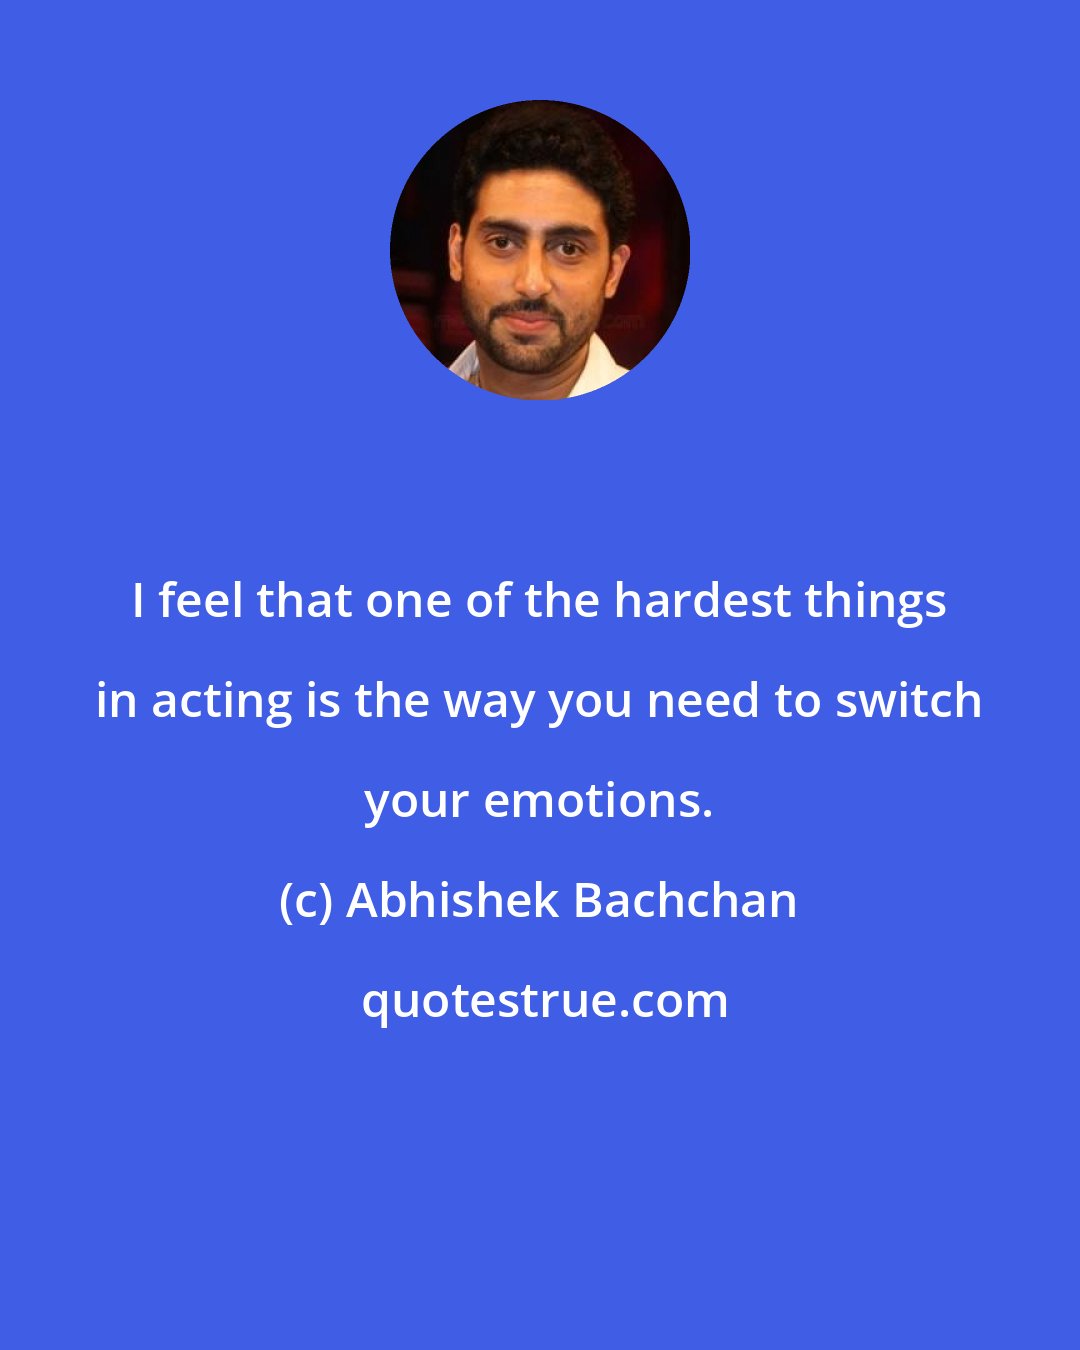 Abhishek Bachchan: I feel that one of the hardest things in acting is the way you need to switch your emotions.